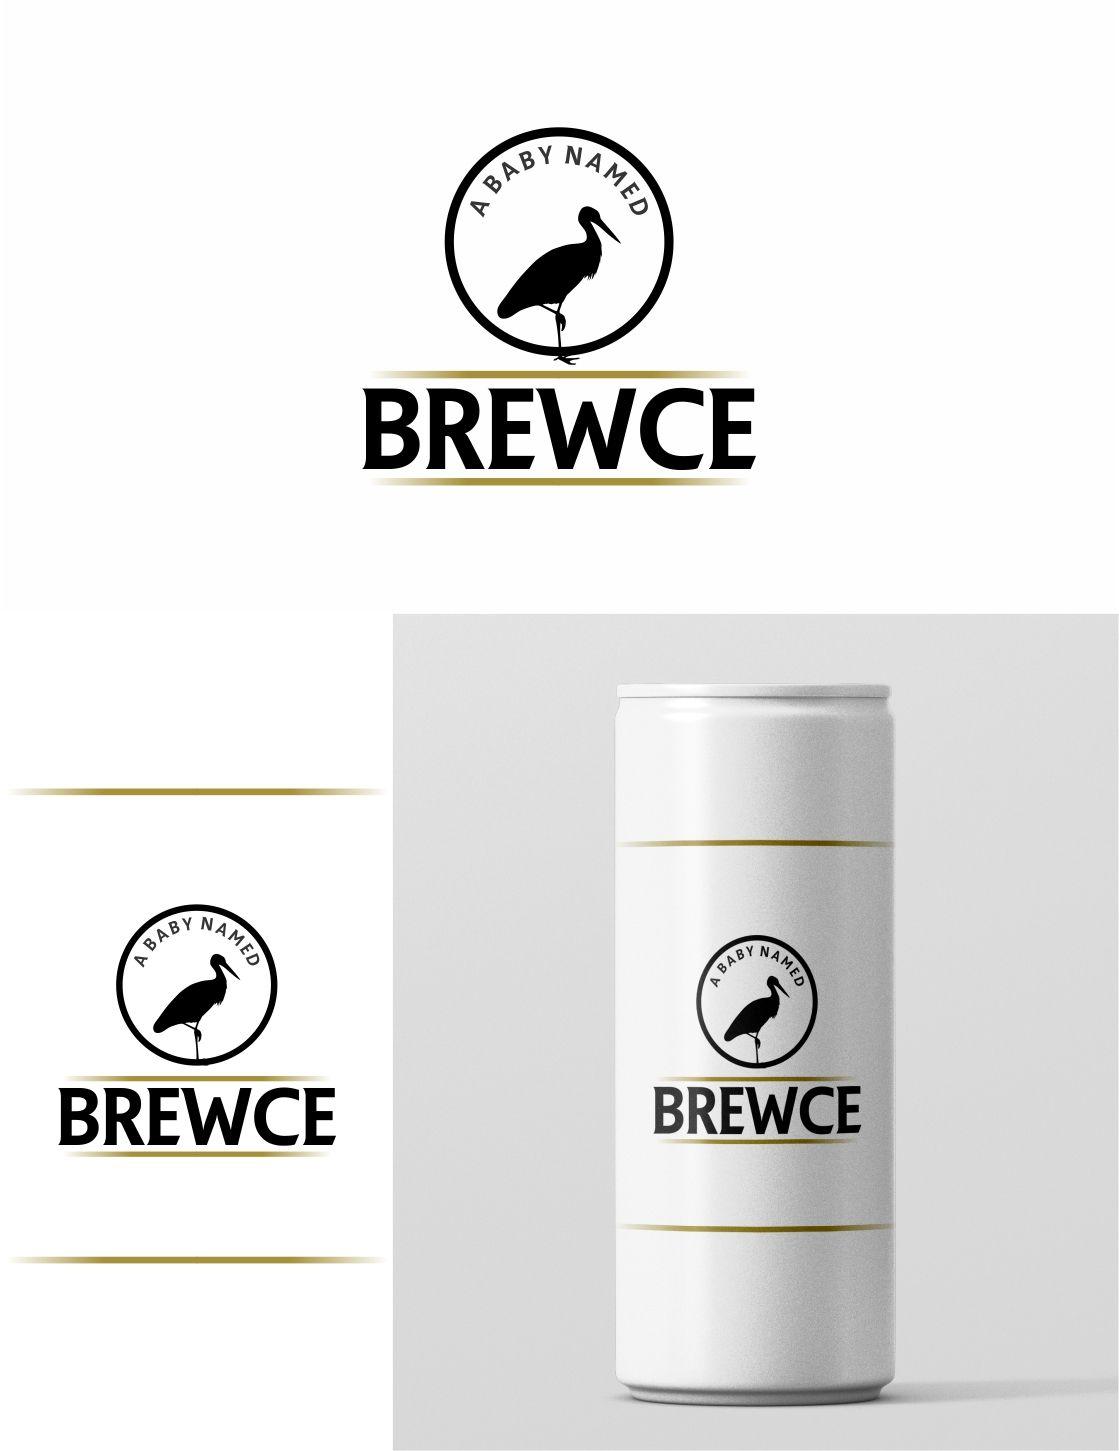 Baby DG Logo - Modern, Masculine, Brewery Logo Design for A Baby Named Brewce by DG ...